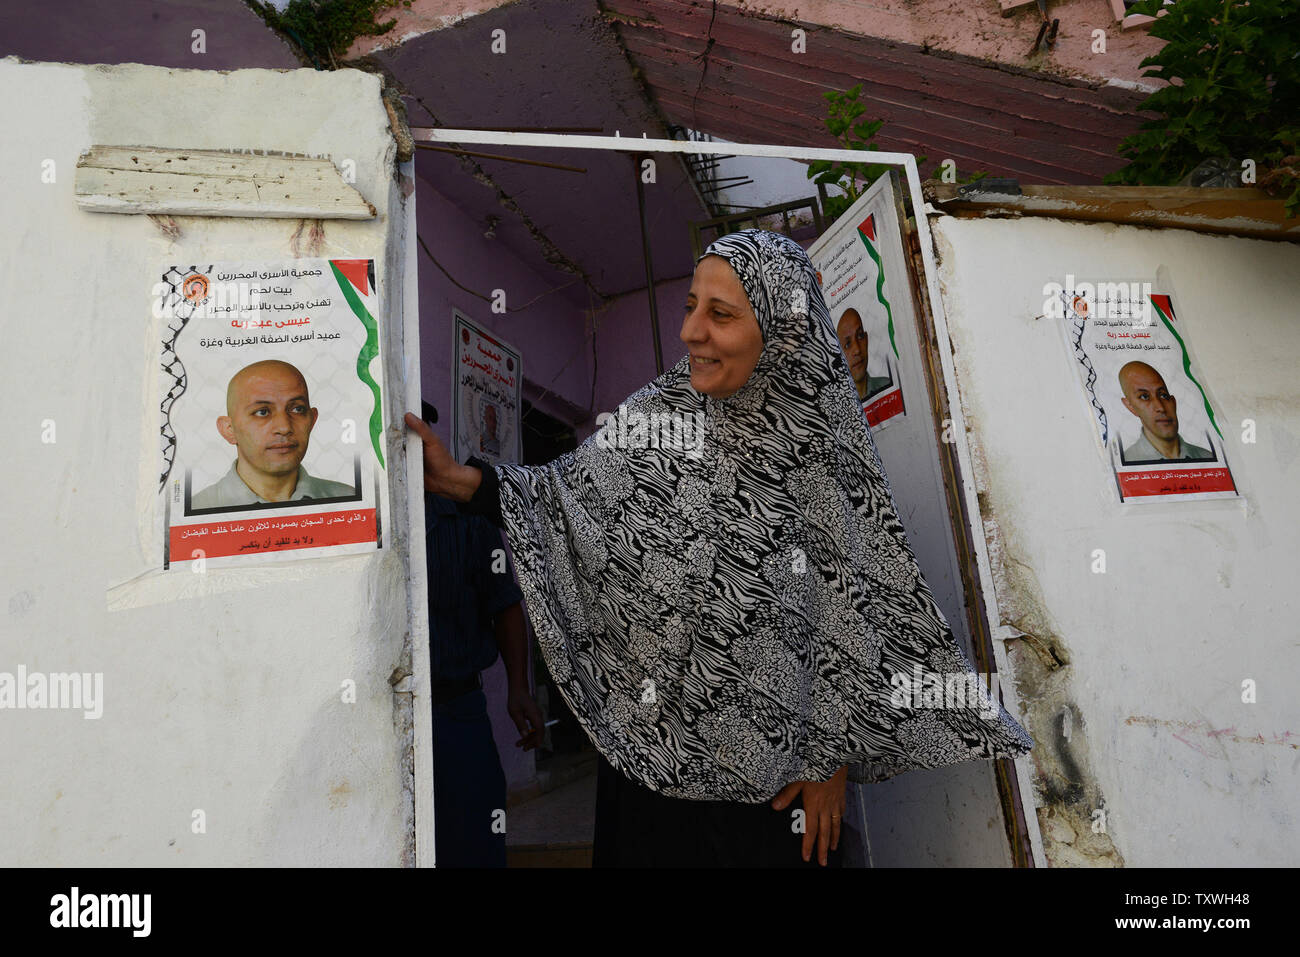 A woman looks at posters of  Palestinian prisoner Issa Abed Rabbo, at the entrance to his home in the Dheisheh Refugee Camp in Bethlehem, West Bank, October 29, 2013. Issa Abed Rabbo has served 30 years in Israeli prison for murdering two Israeli students in 1984. He is one of  26 Palestinian prisoners slated for release.  UPI/Debbie Hill Stock Photo